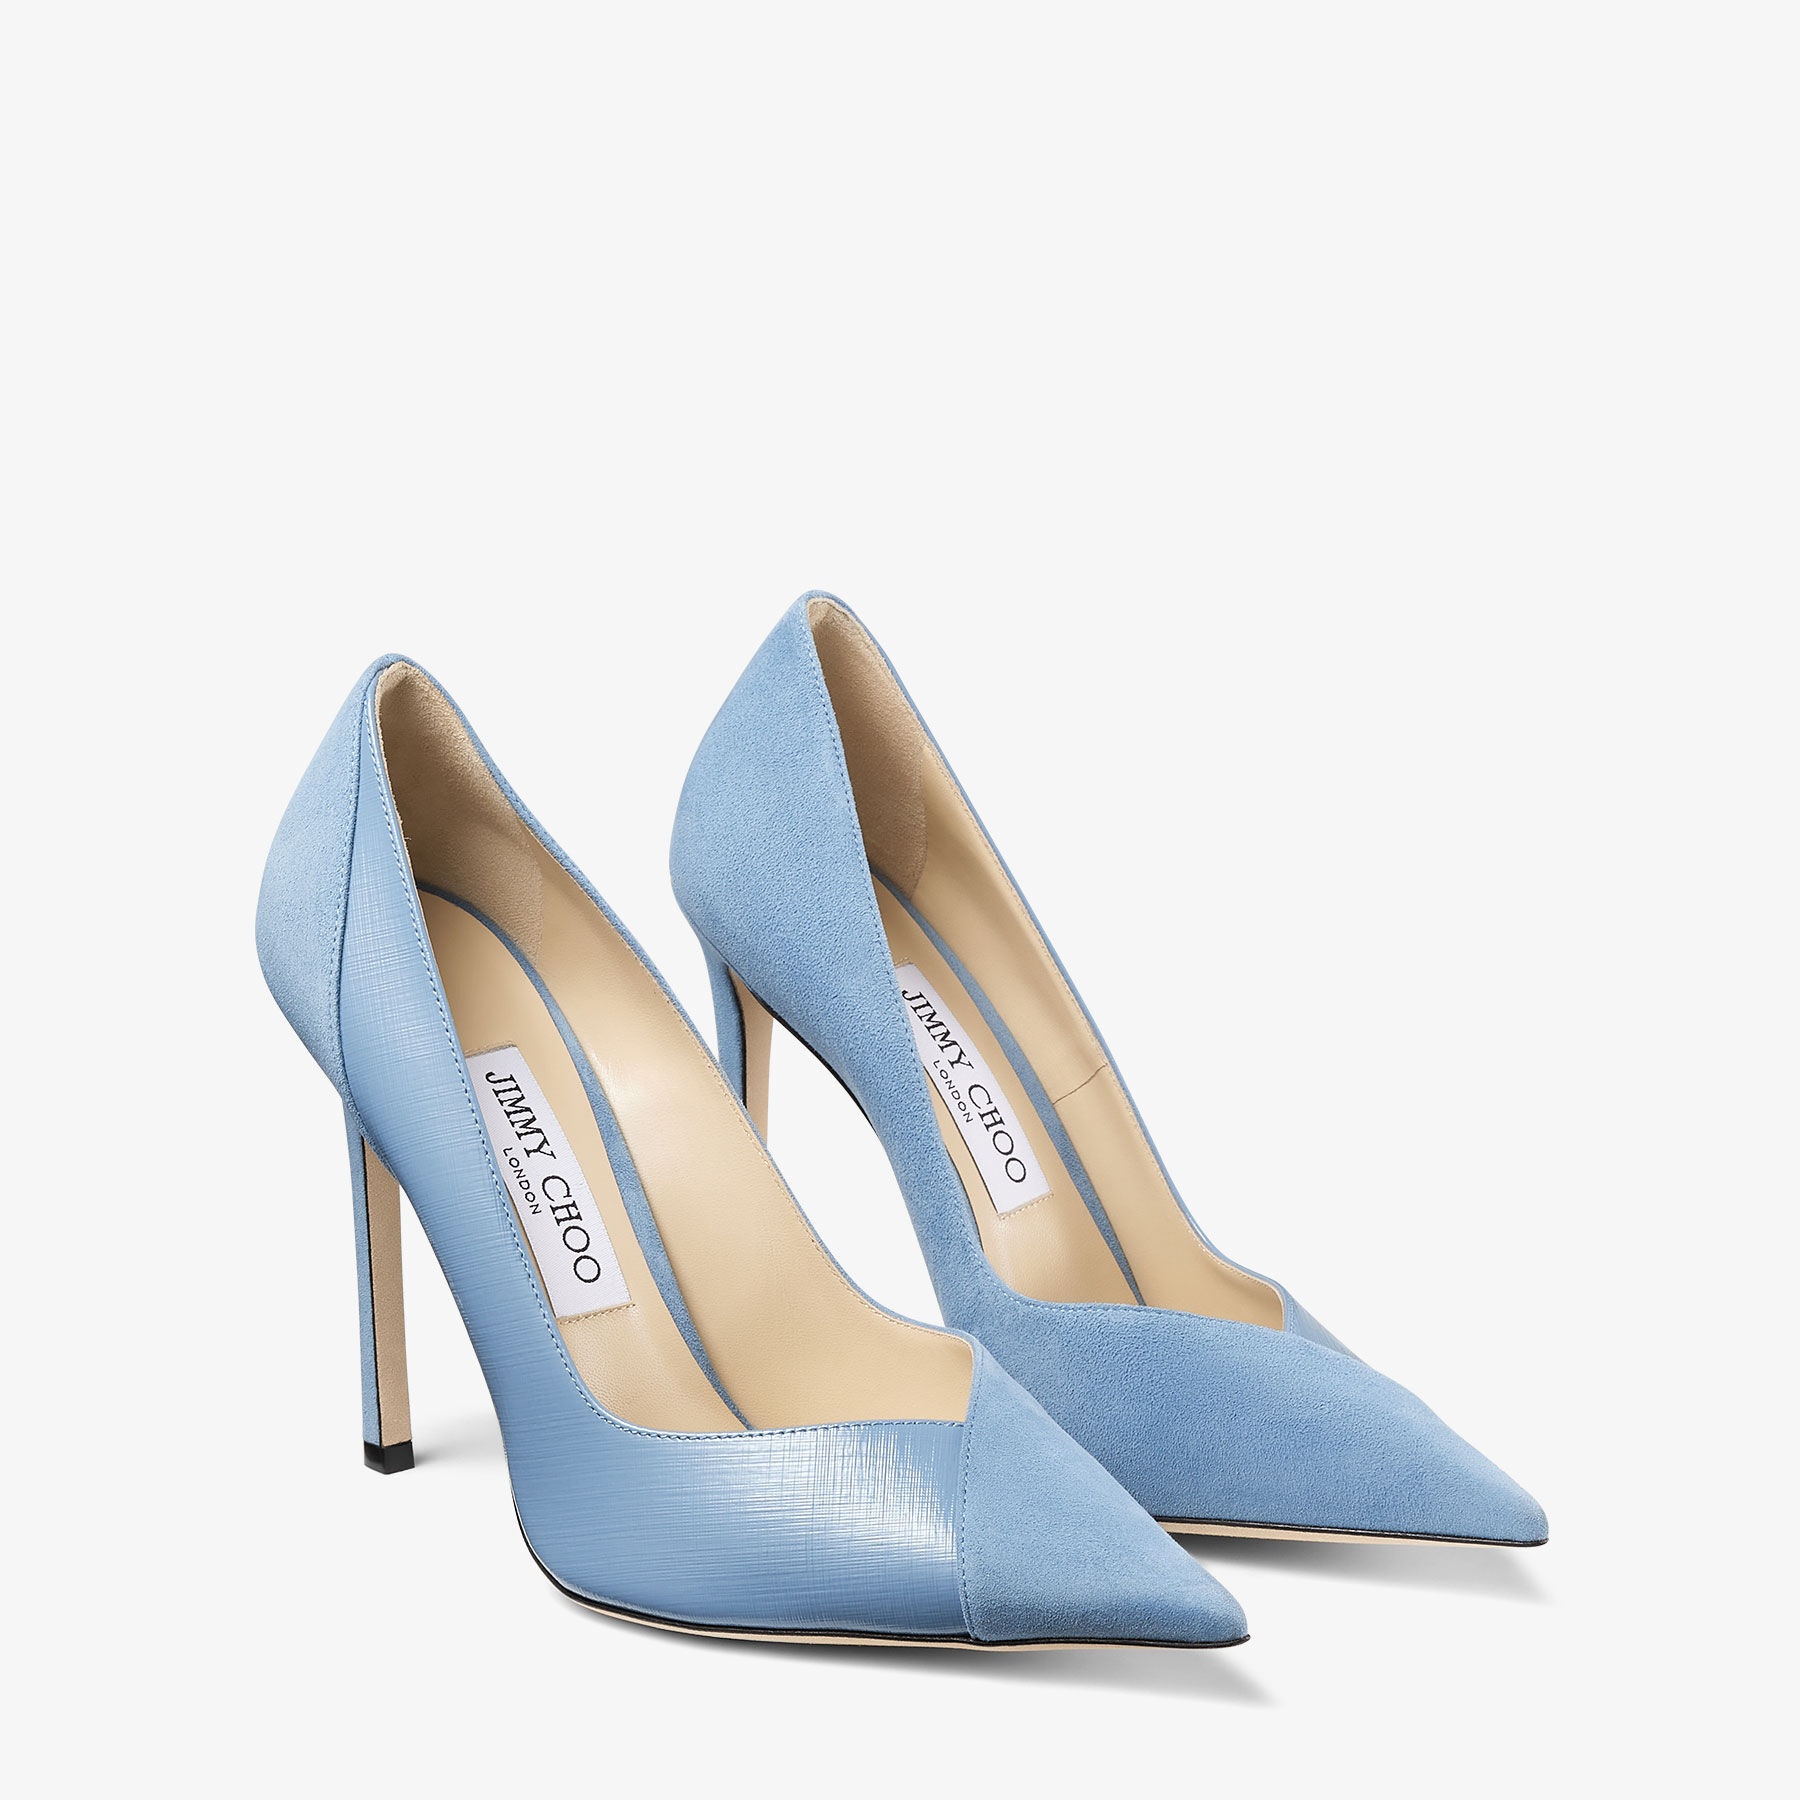 Cass 110
Smoky Blue Suede and Etched Patent Leather Pumps - 3